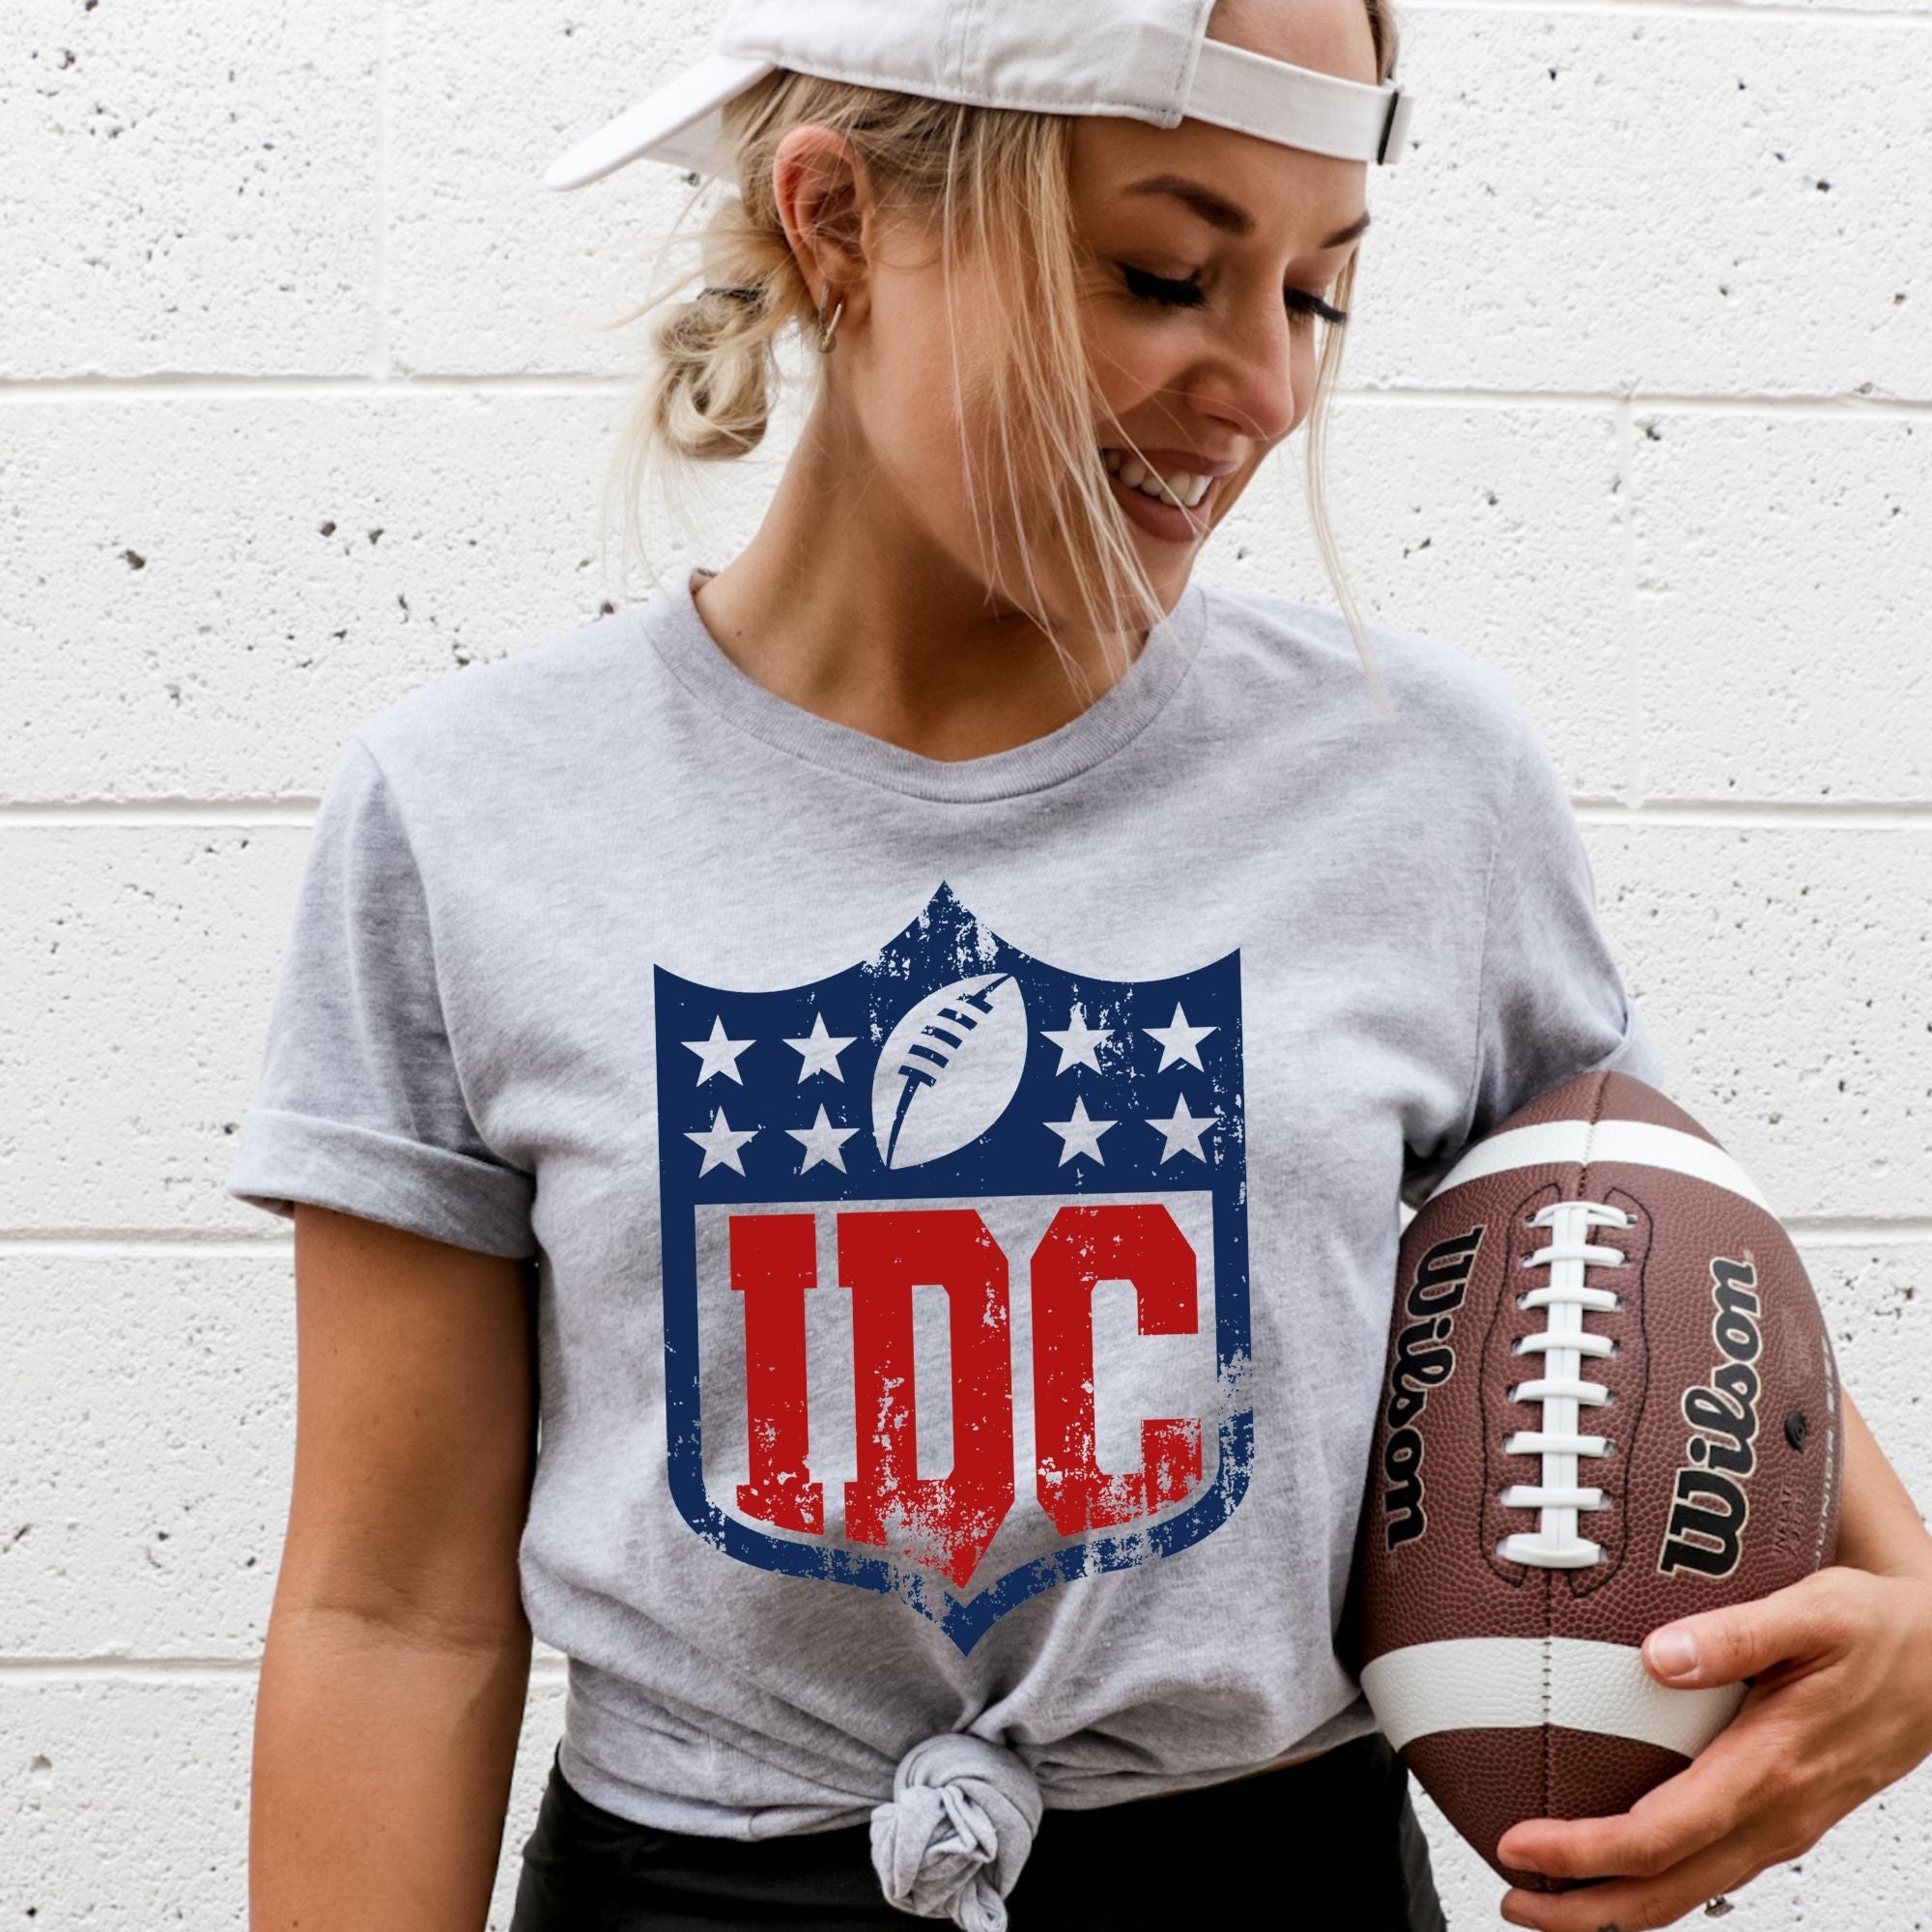 Hilarious Football Graphic Tee *UNISEX FIT*-Graphic Tees-208 Tees Wholesale, Idaho